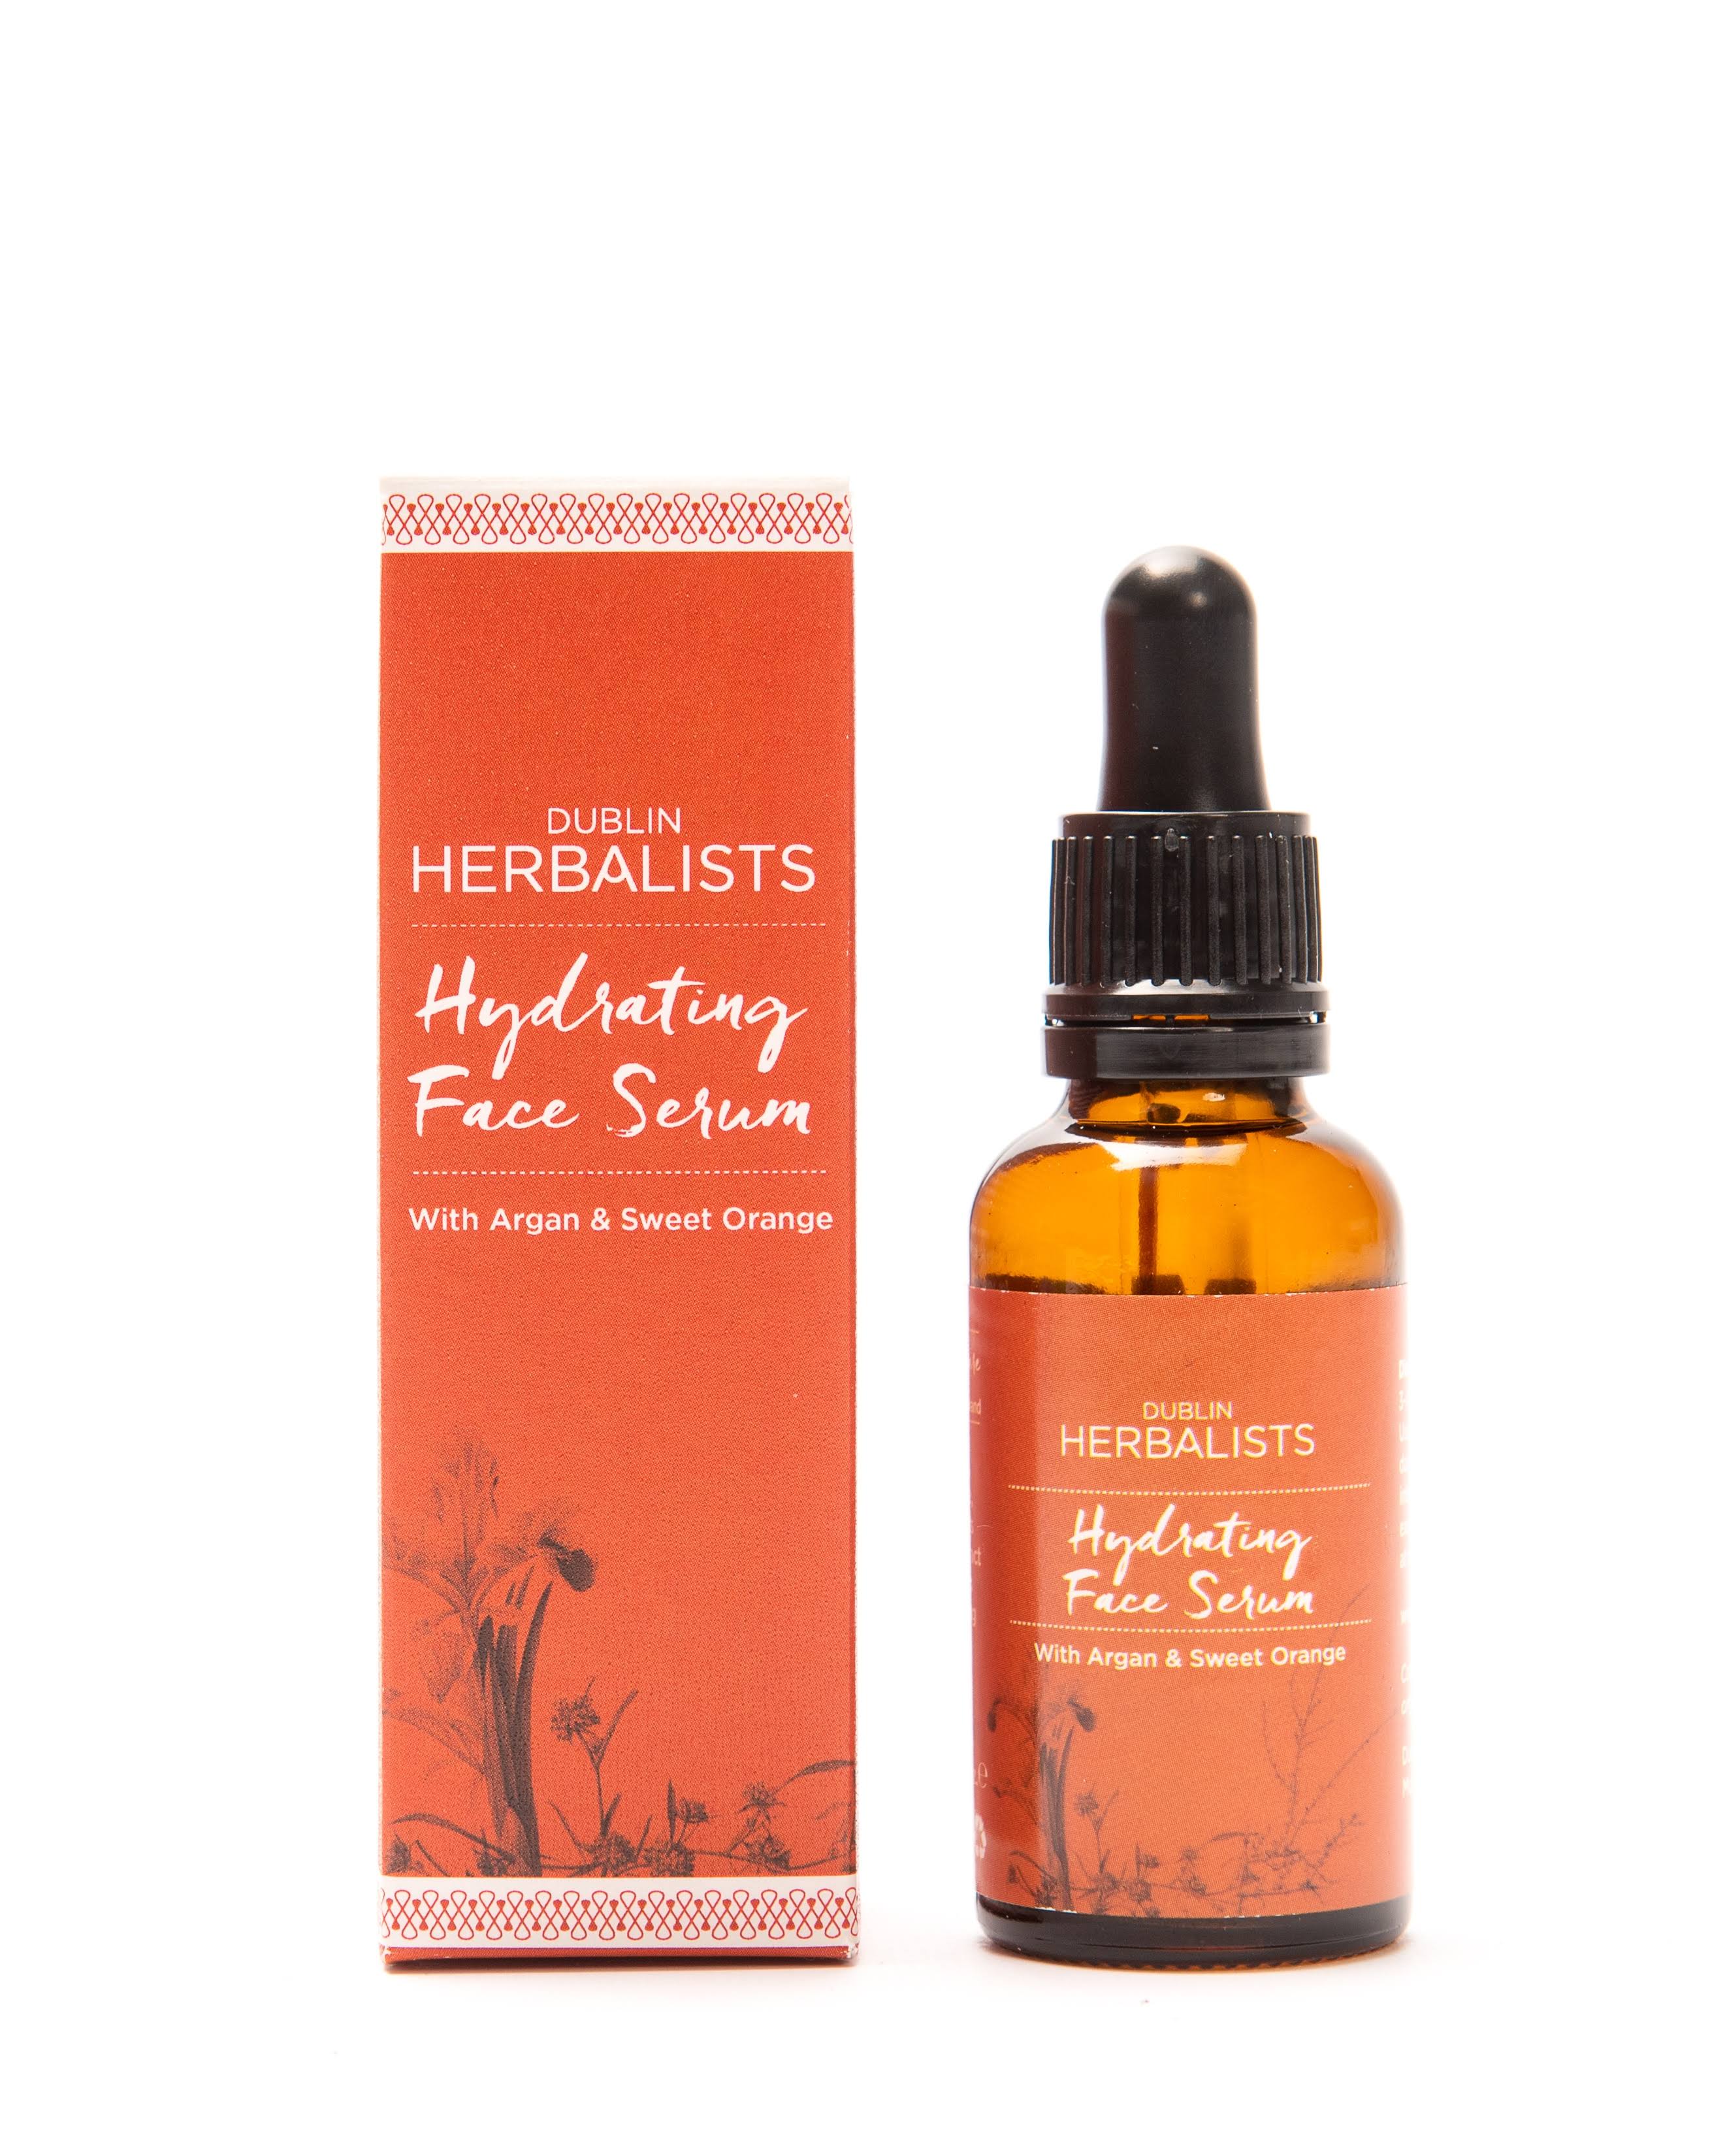 Dublin Herbalists Hydrating Face Serum with Argan Oil and Sweet Orange